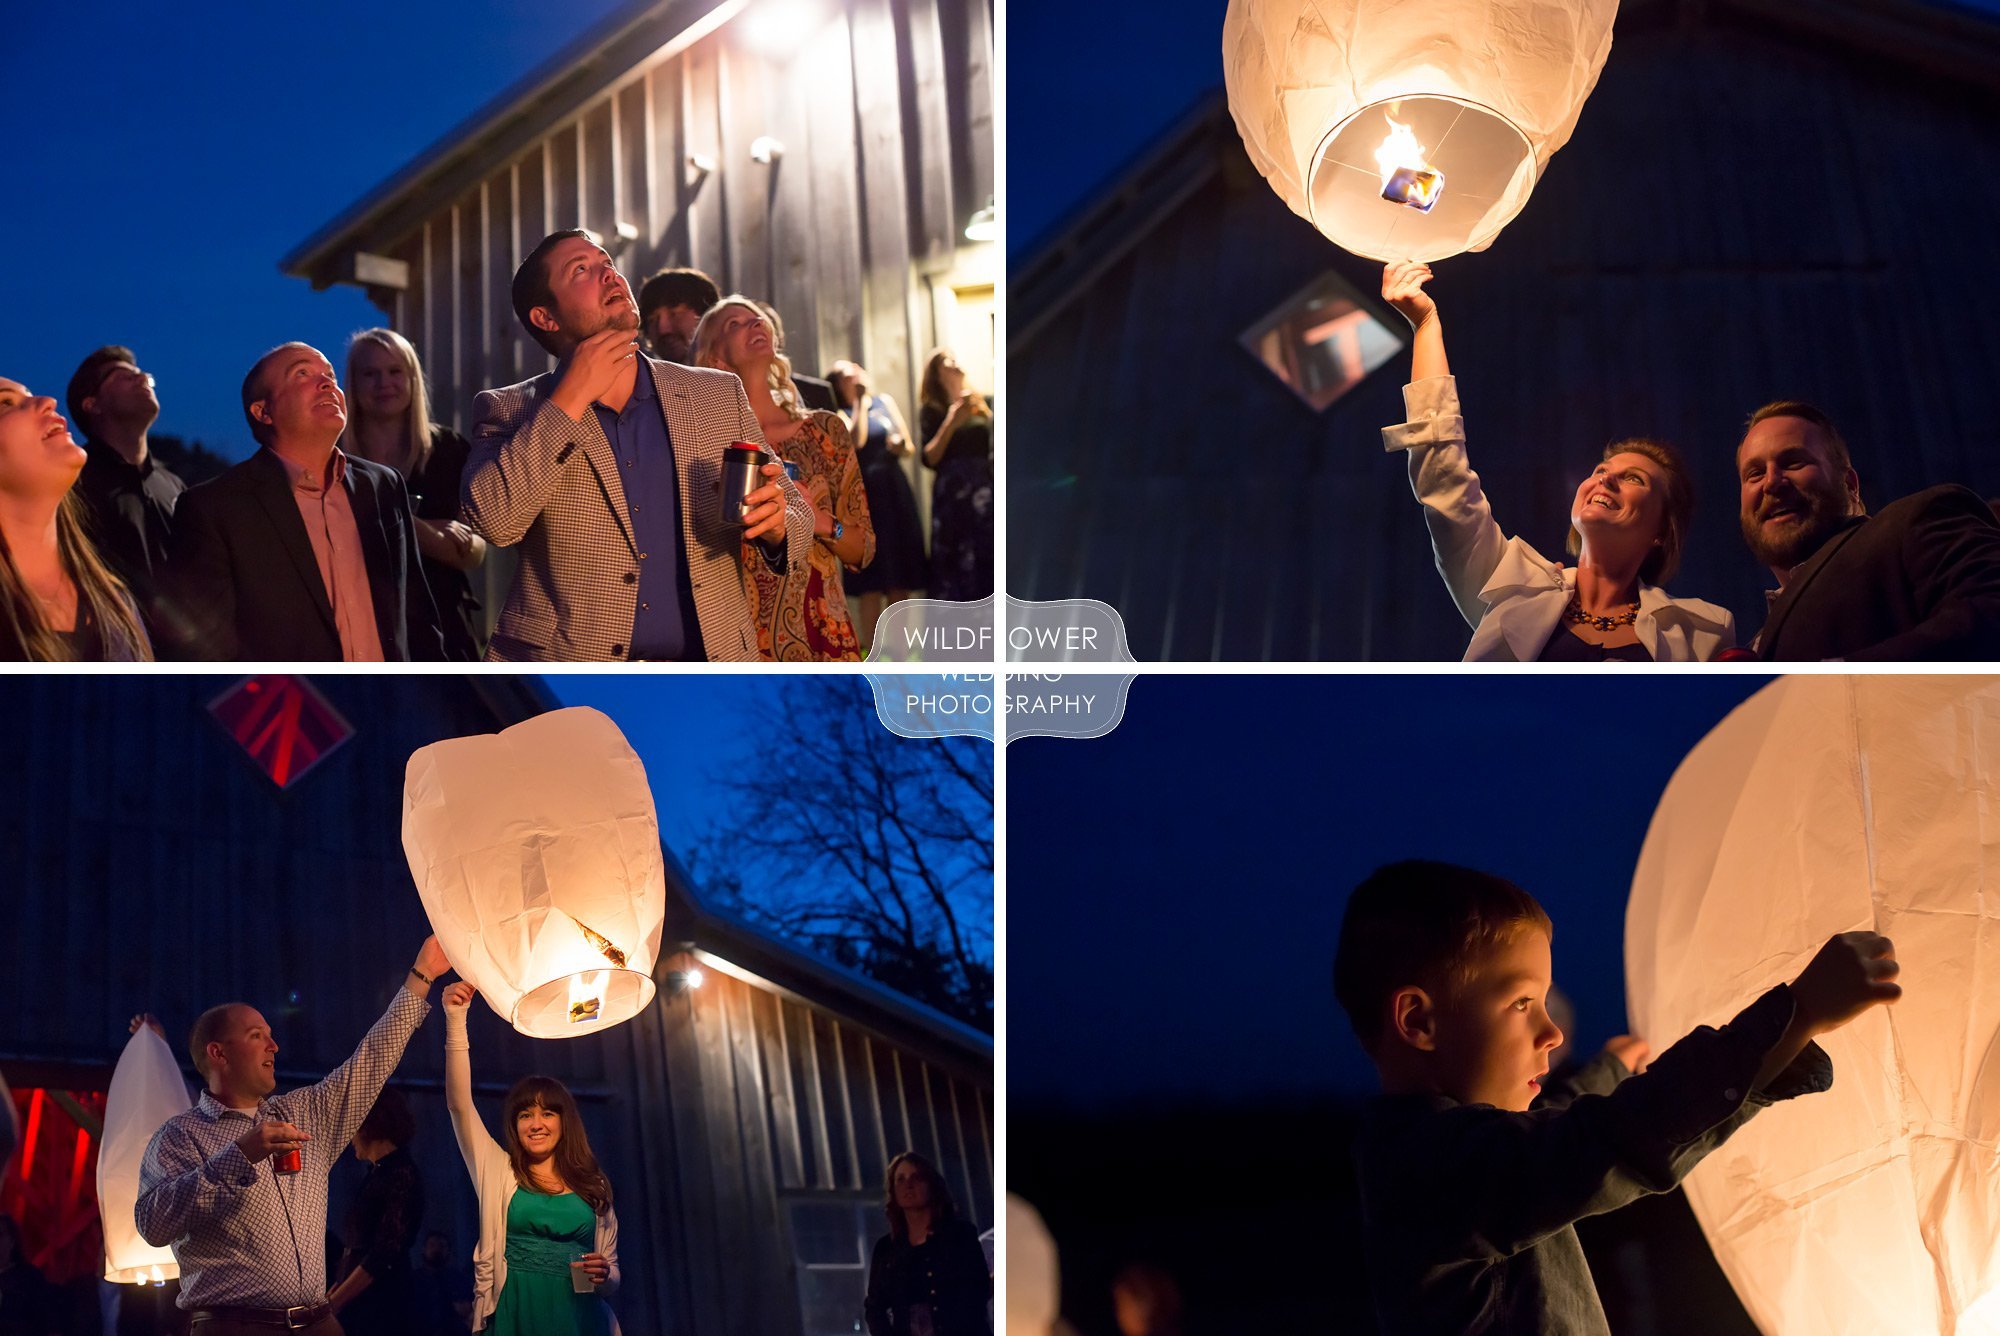 Guests have fun setting magical wish lanterns into the sky after this Schwinn Produce Farm wedding in KS.